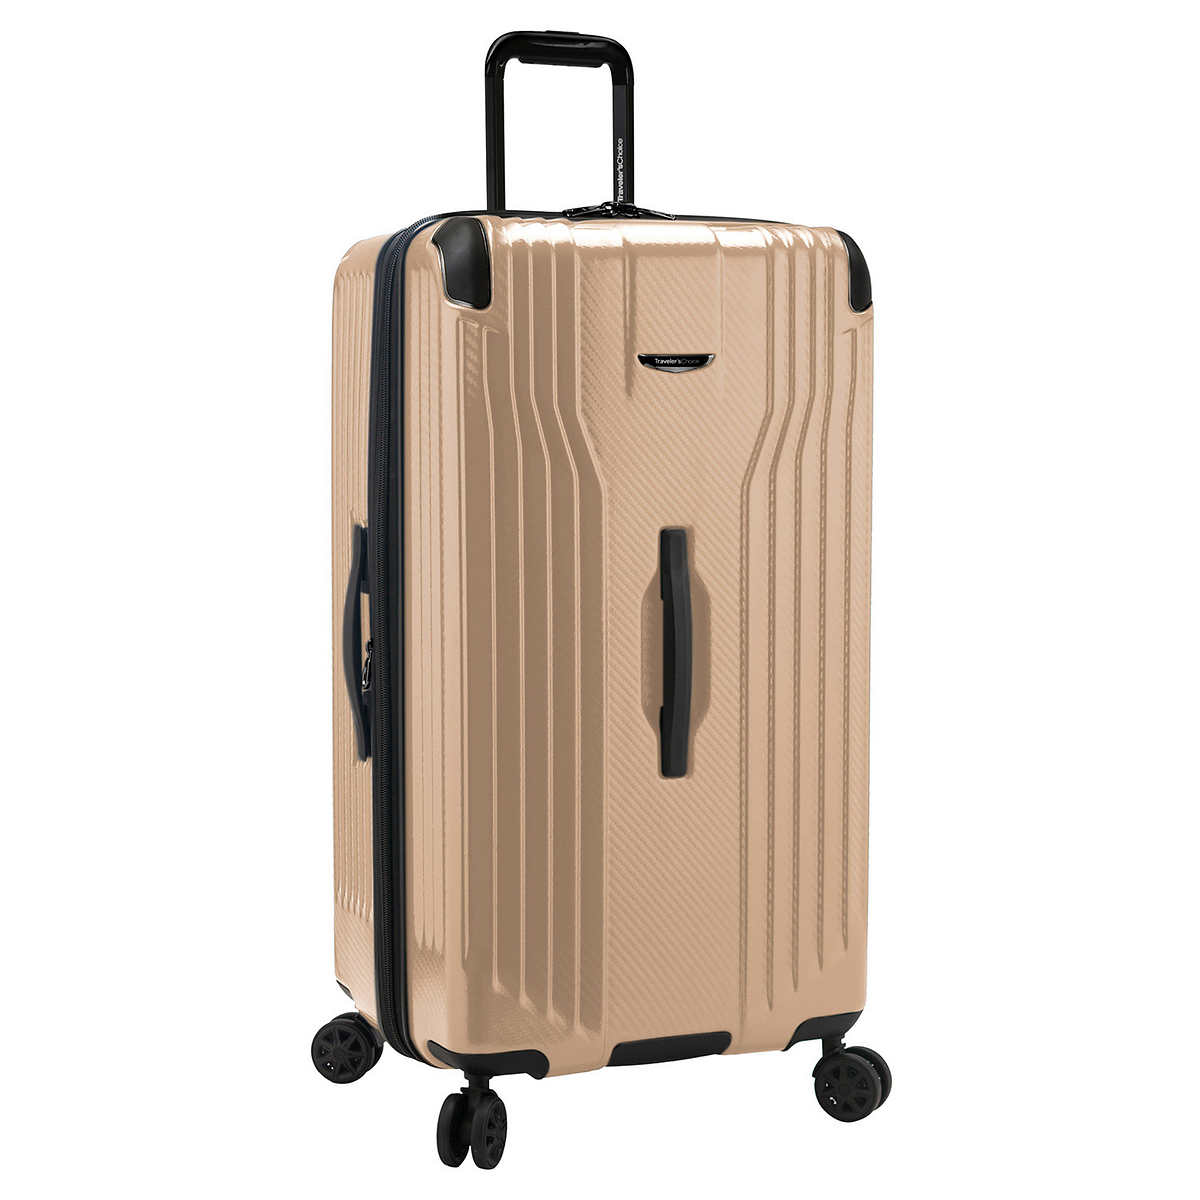 Traveler's Choice 30 Creekside Hardside Check-in Luggage Spinner